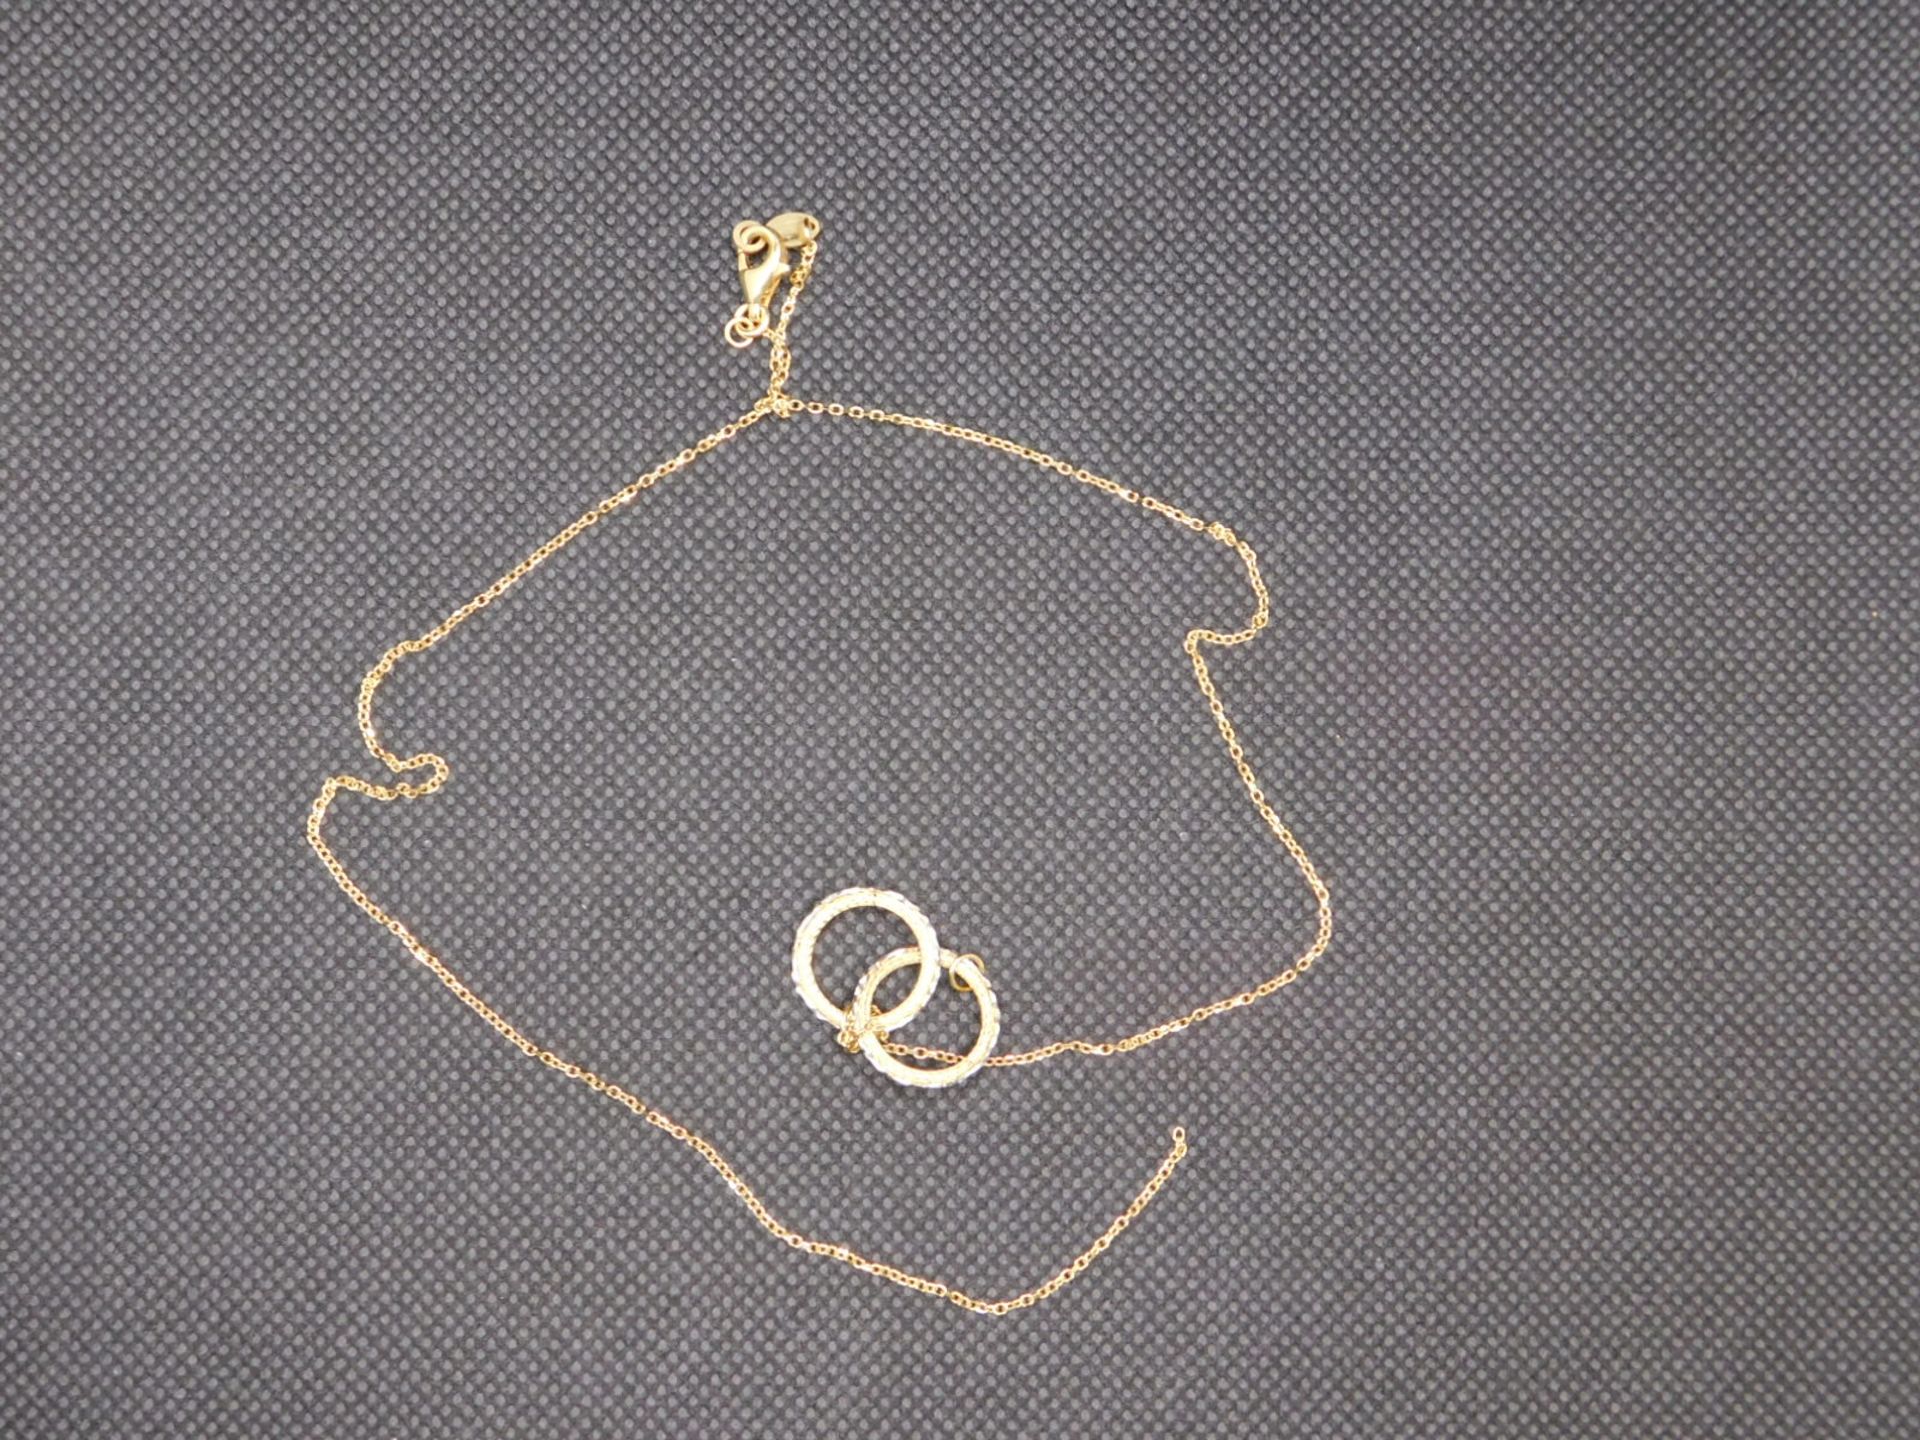 1 BOXED 14KT GOLD CHAIN NECKLACE RRP Â£249